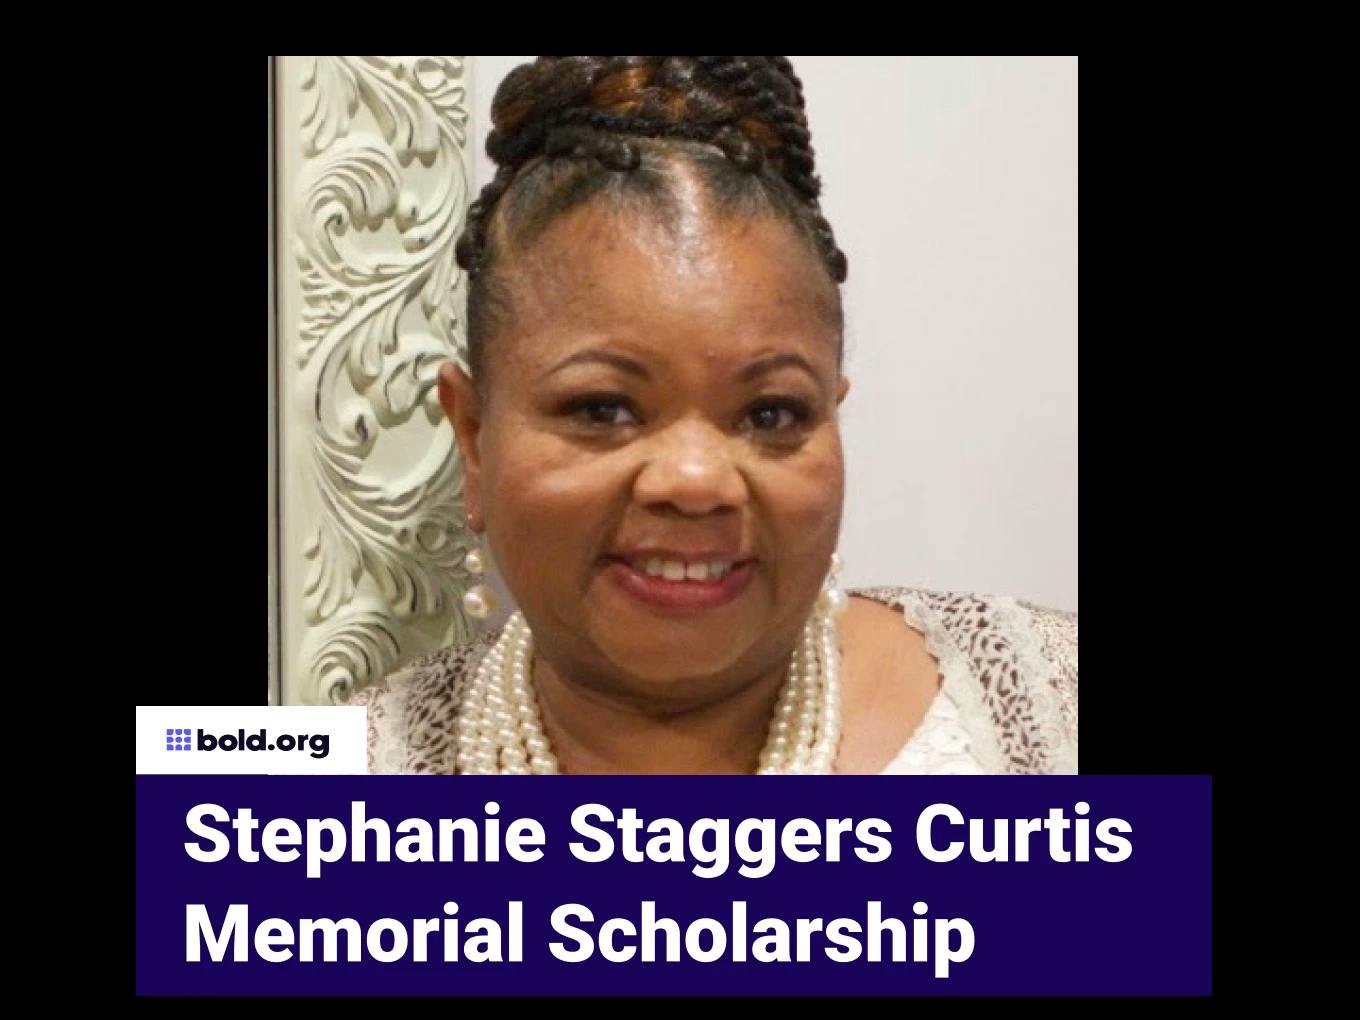 Stephanie Staggers Curtis Memorial Scholarship